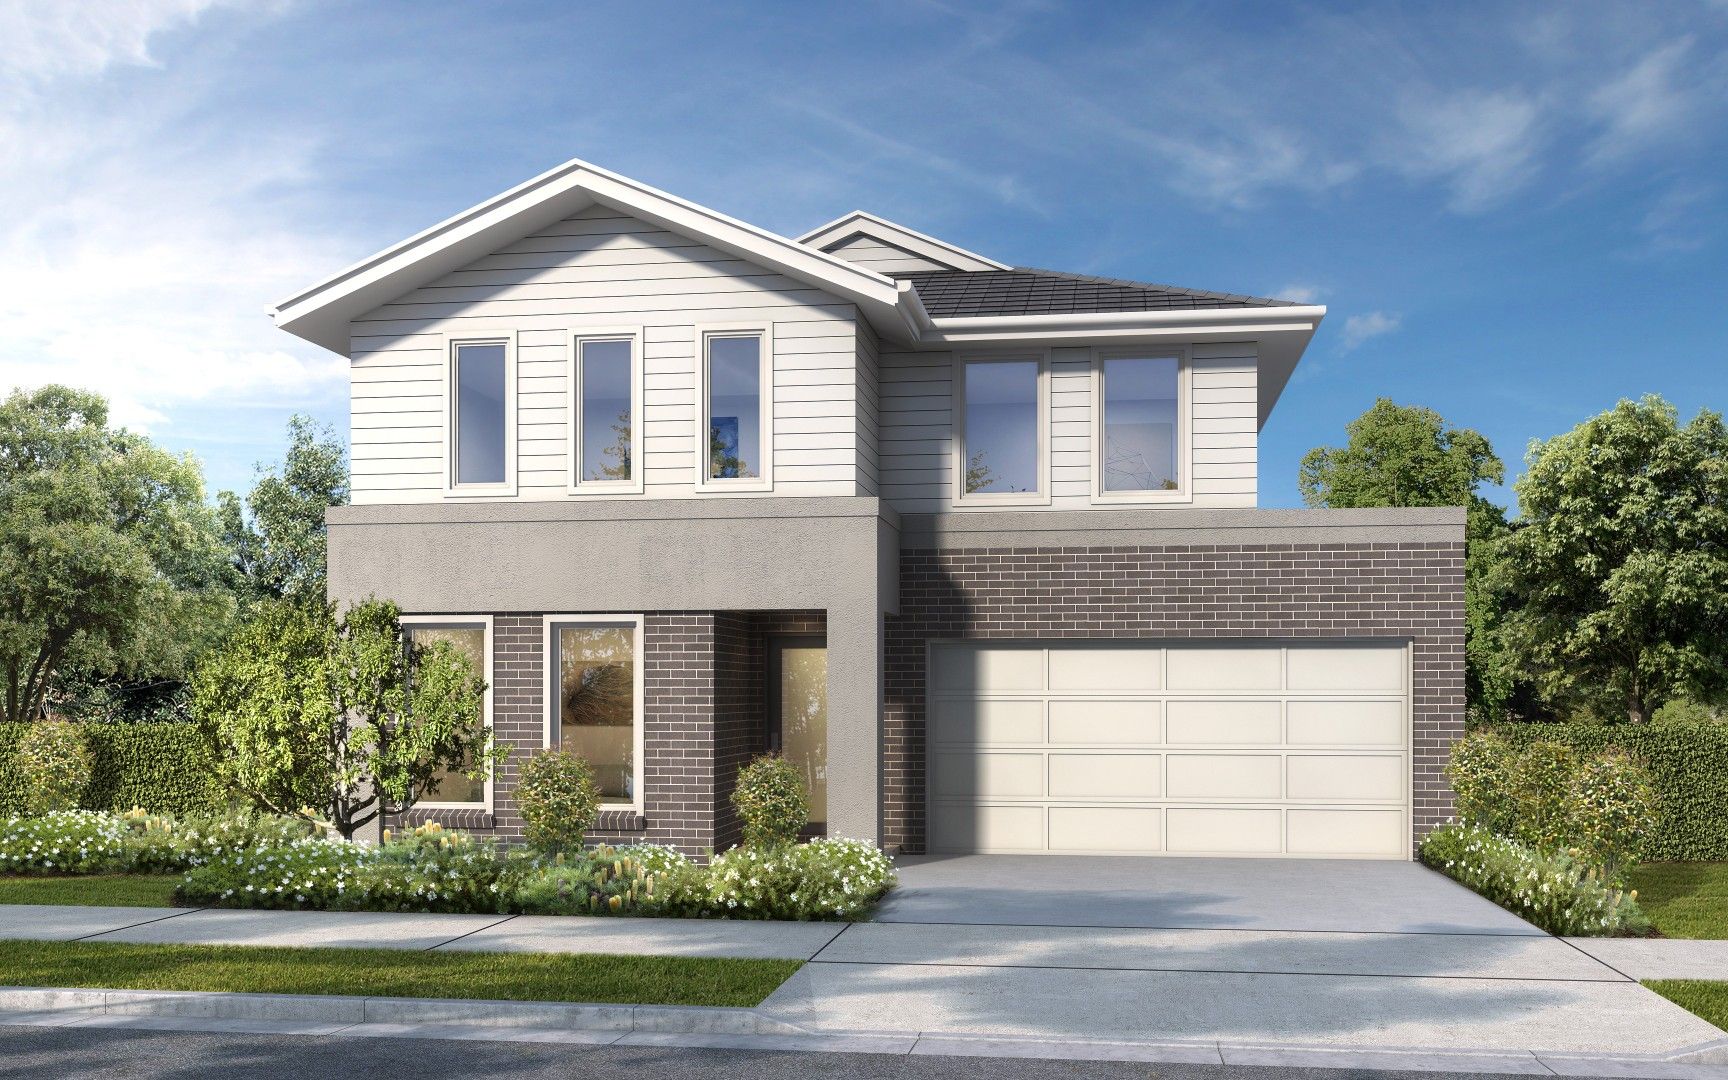 5 bedrooms New House & Land in Lot 47 Rinnana Place ST GEORGES BASIN NSW, 2540